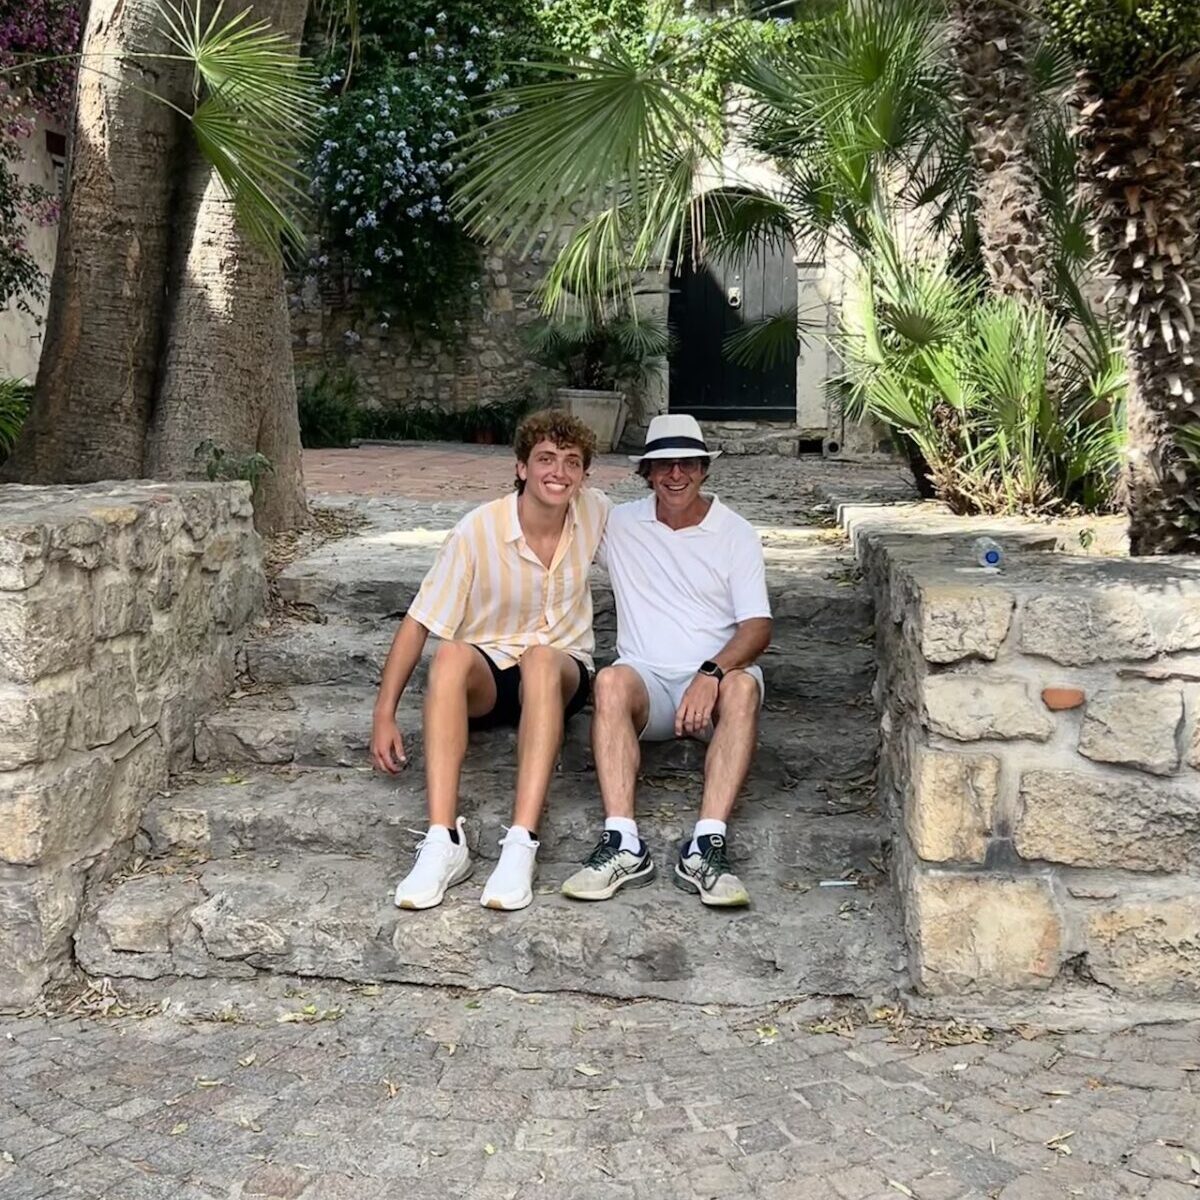 Two men sit on the steps with palm trees in the background.